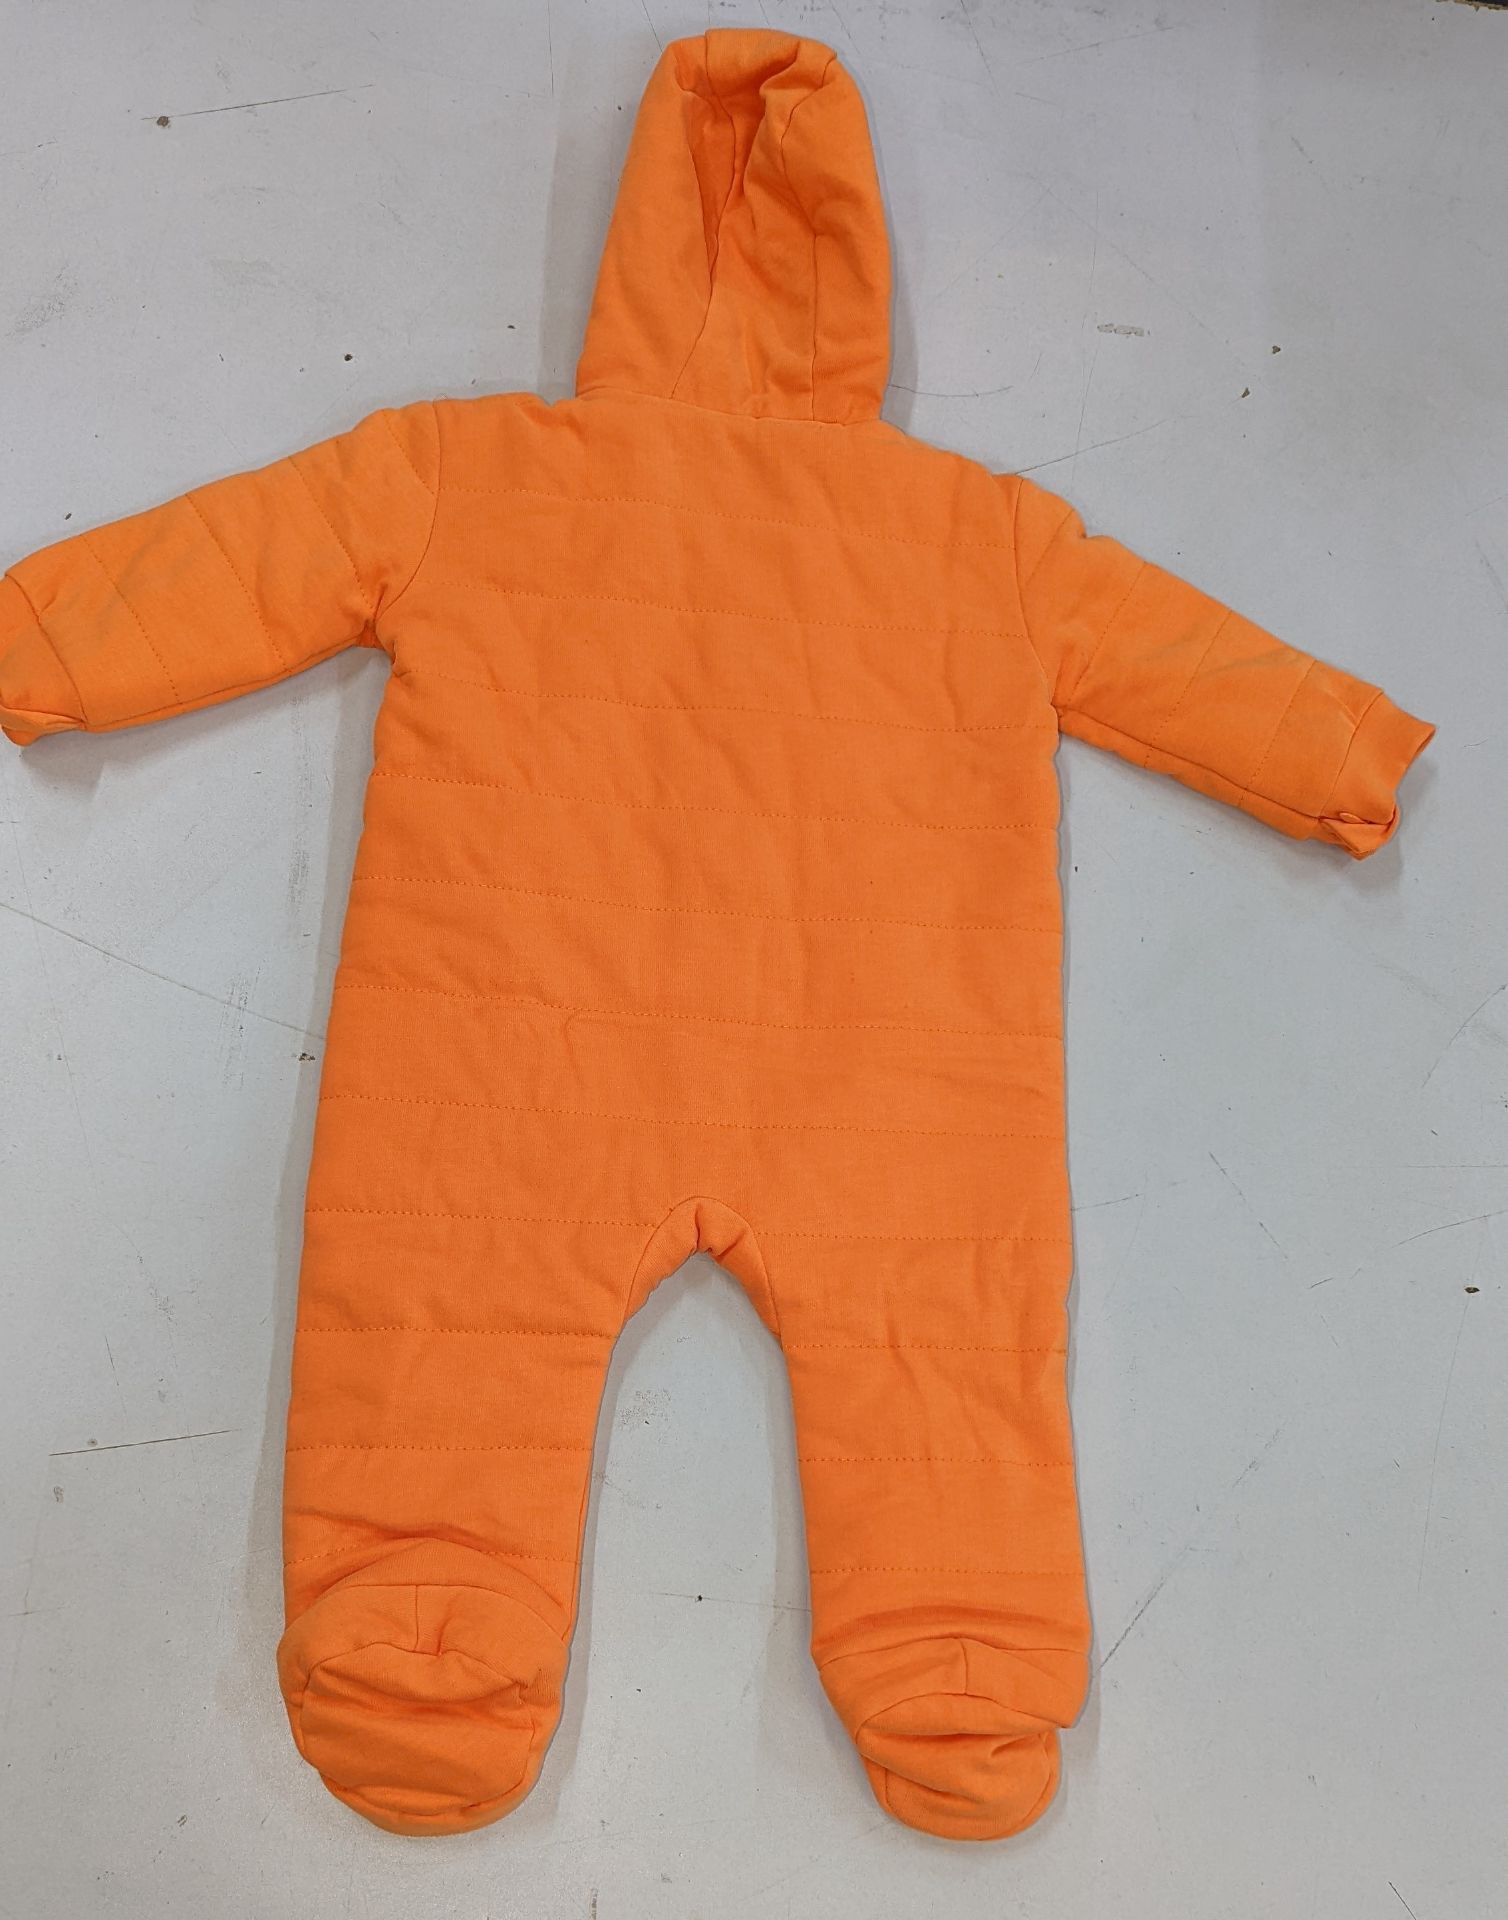 20 off Mosé Baby unisex orange romper body suits, in 100% cotton with Mosé Baby print lining. Age 3 - Image 2 of 10